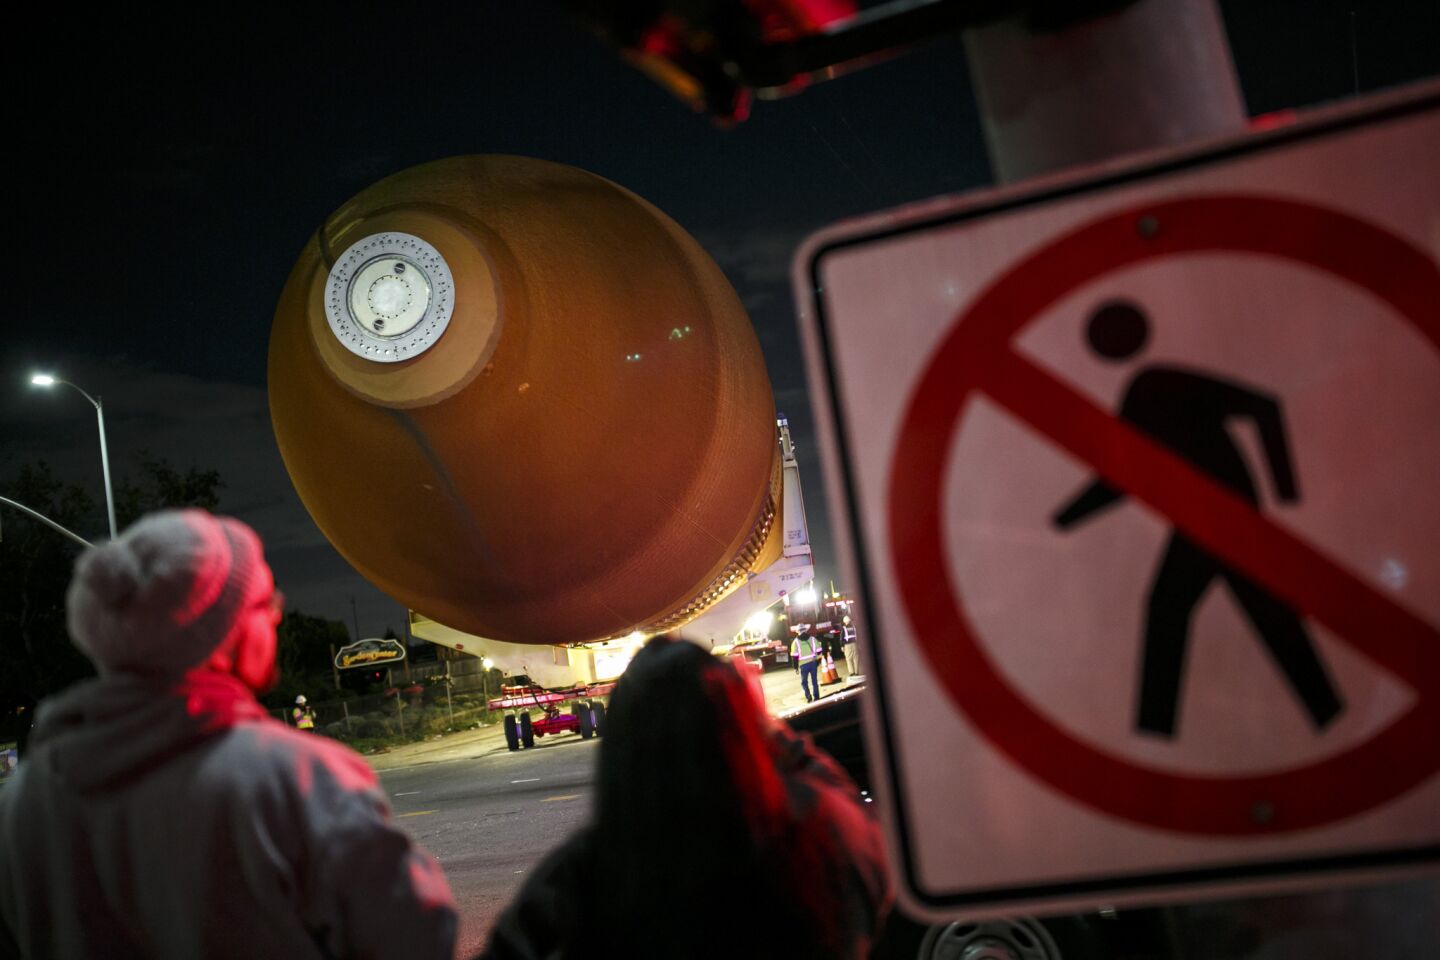 ET-94, the last space shuttle fuel tank, travels along Los Angeles city streets to the California Science Center in Exposition Park.